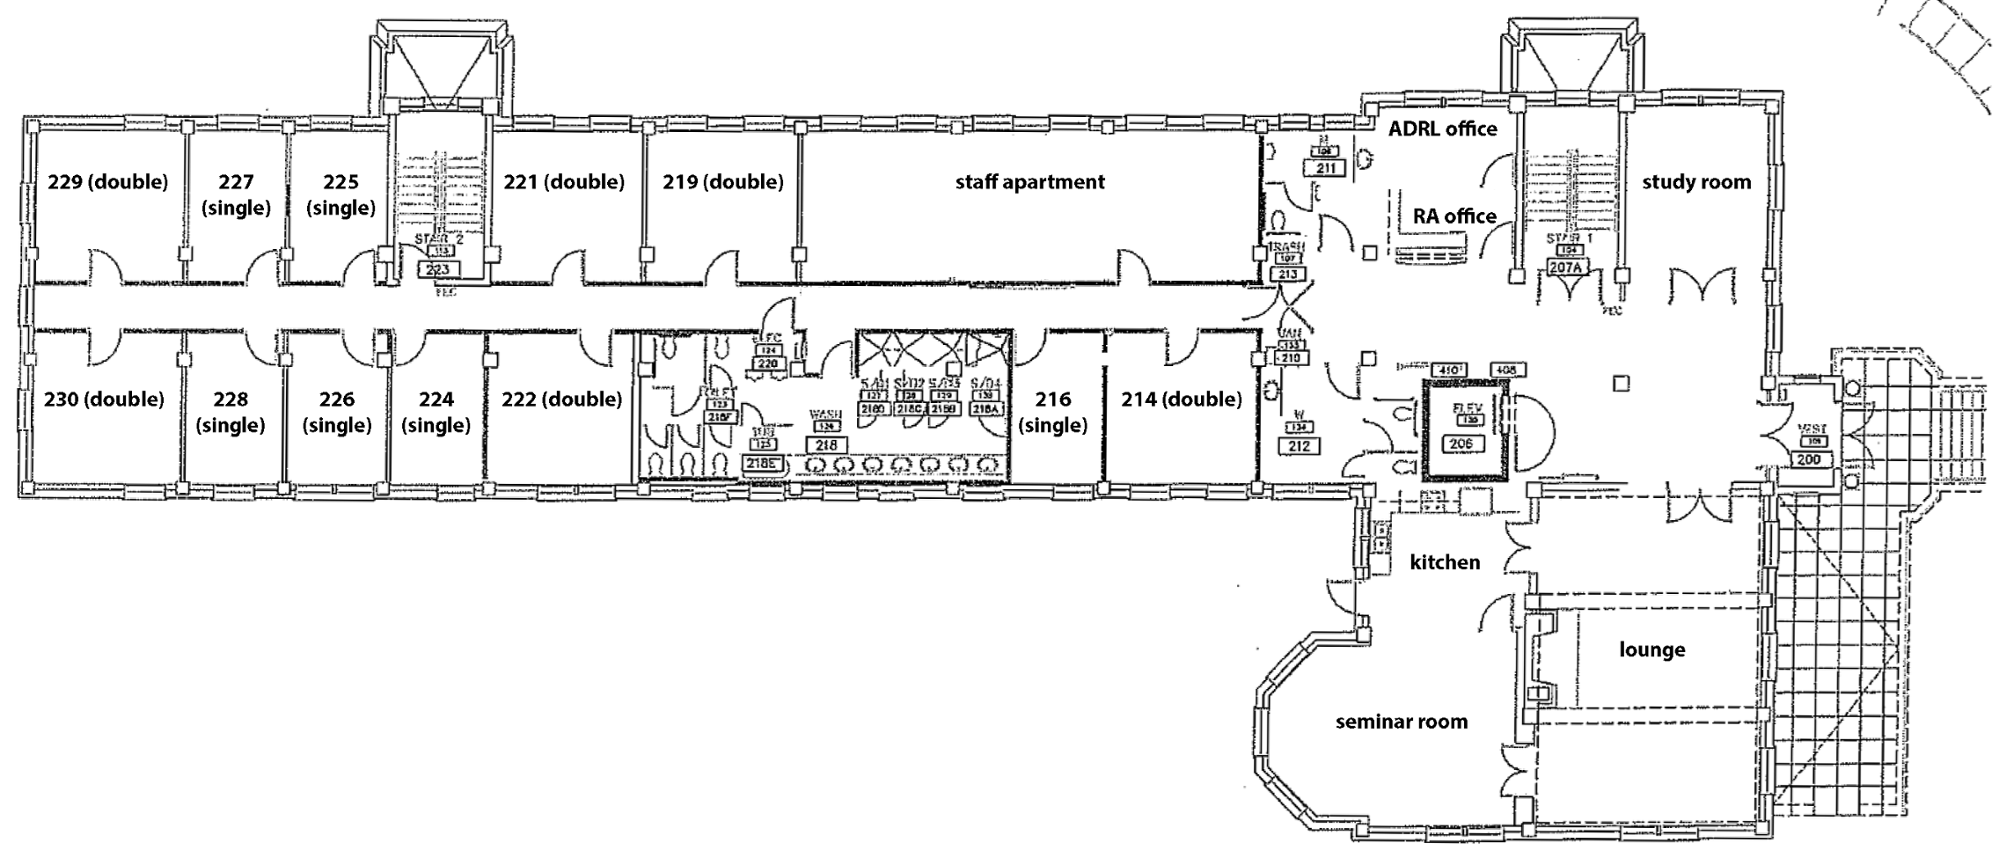 Ford hall smith college floor plan #1